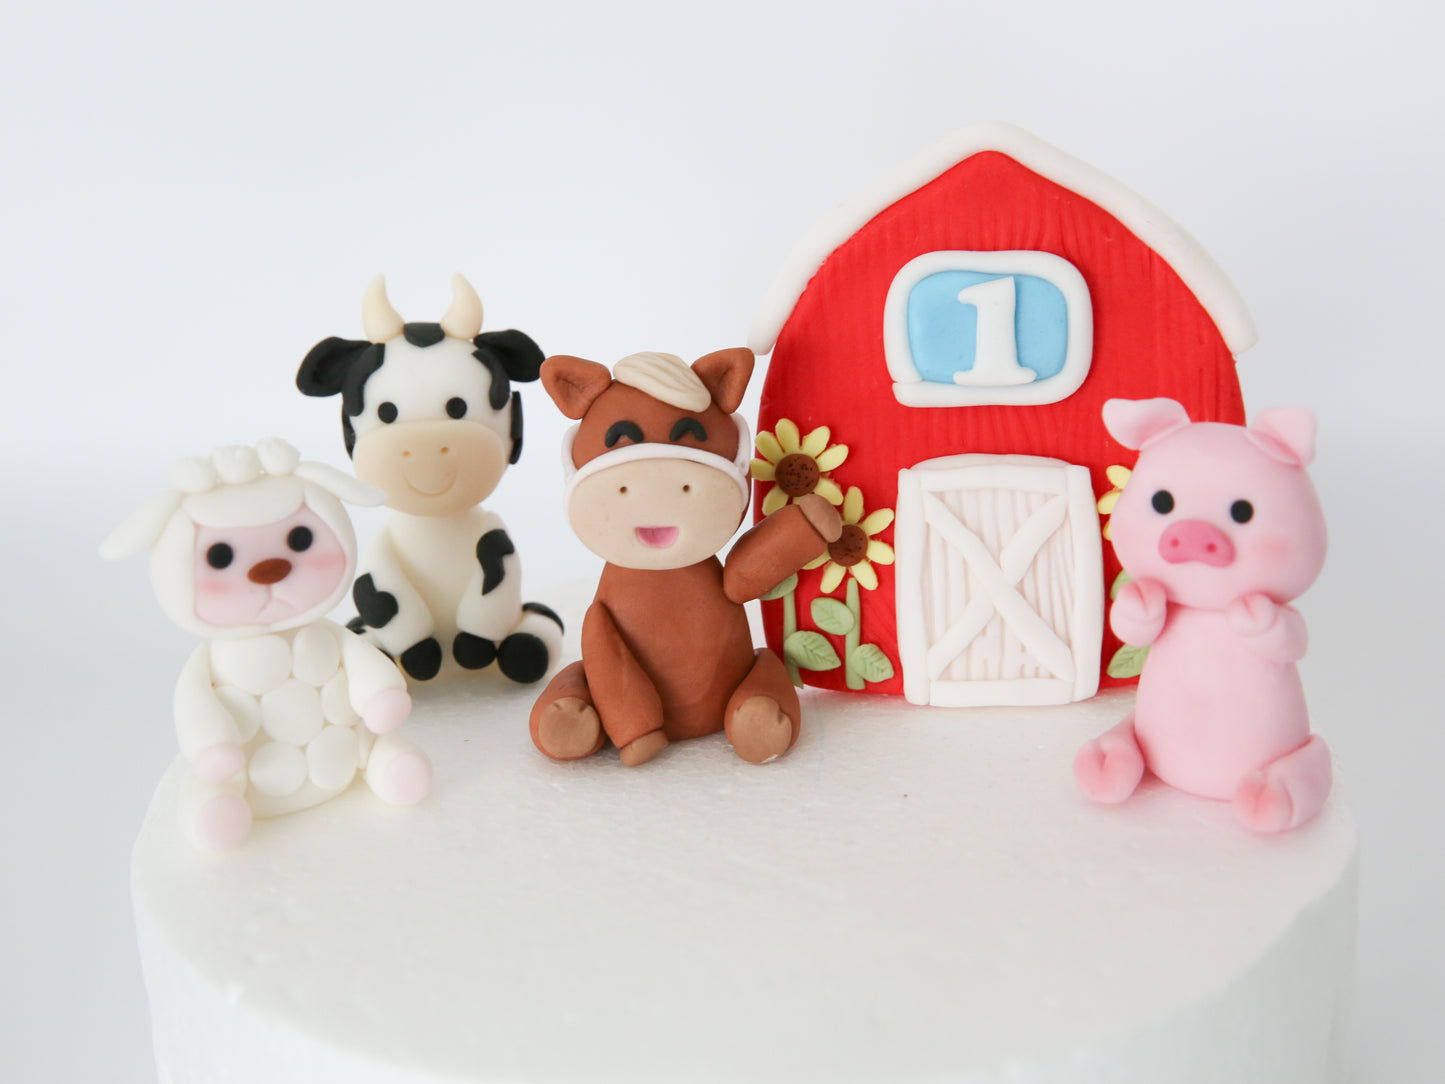 Horse, Pig, Sheep and Cow Baby Farm Animals